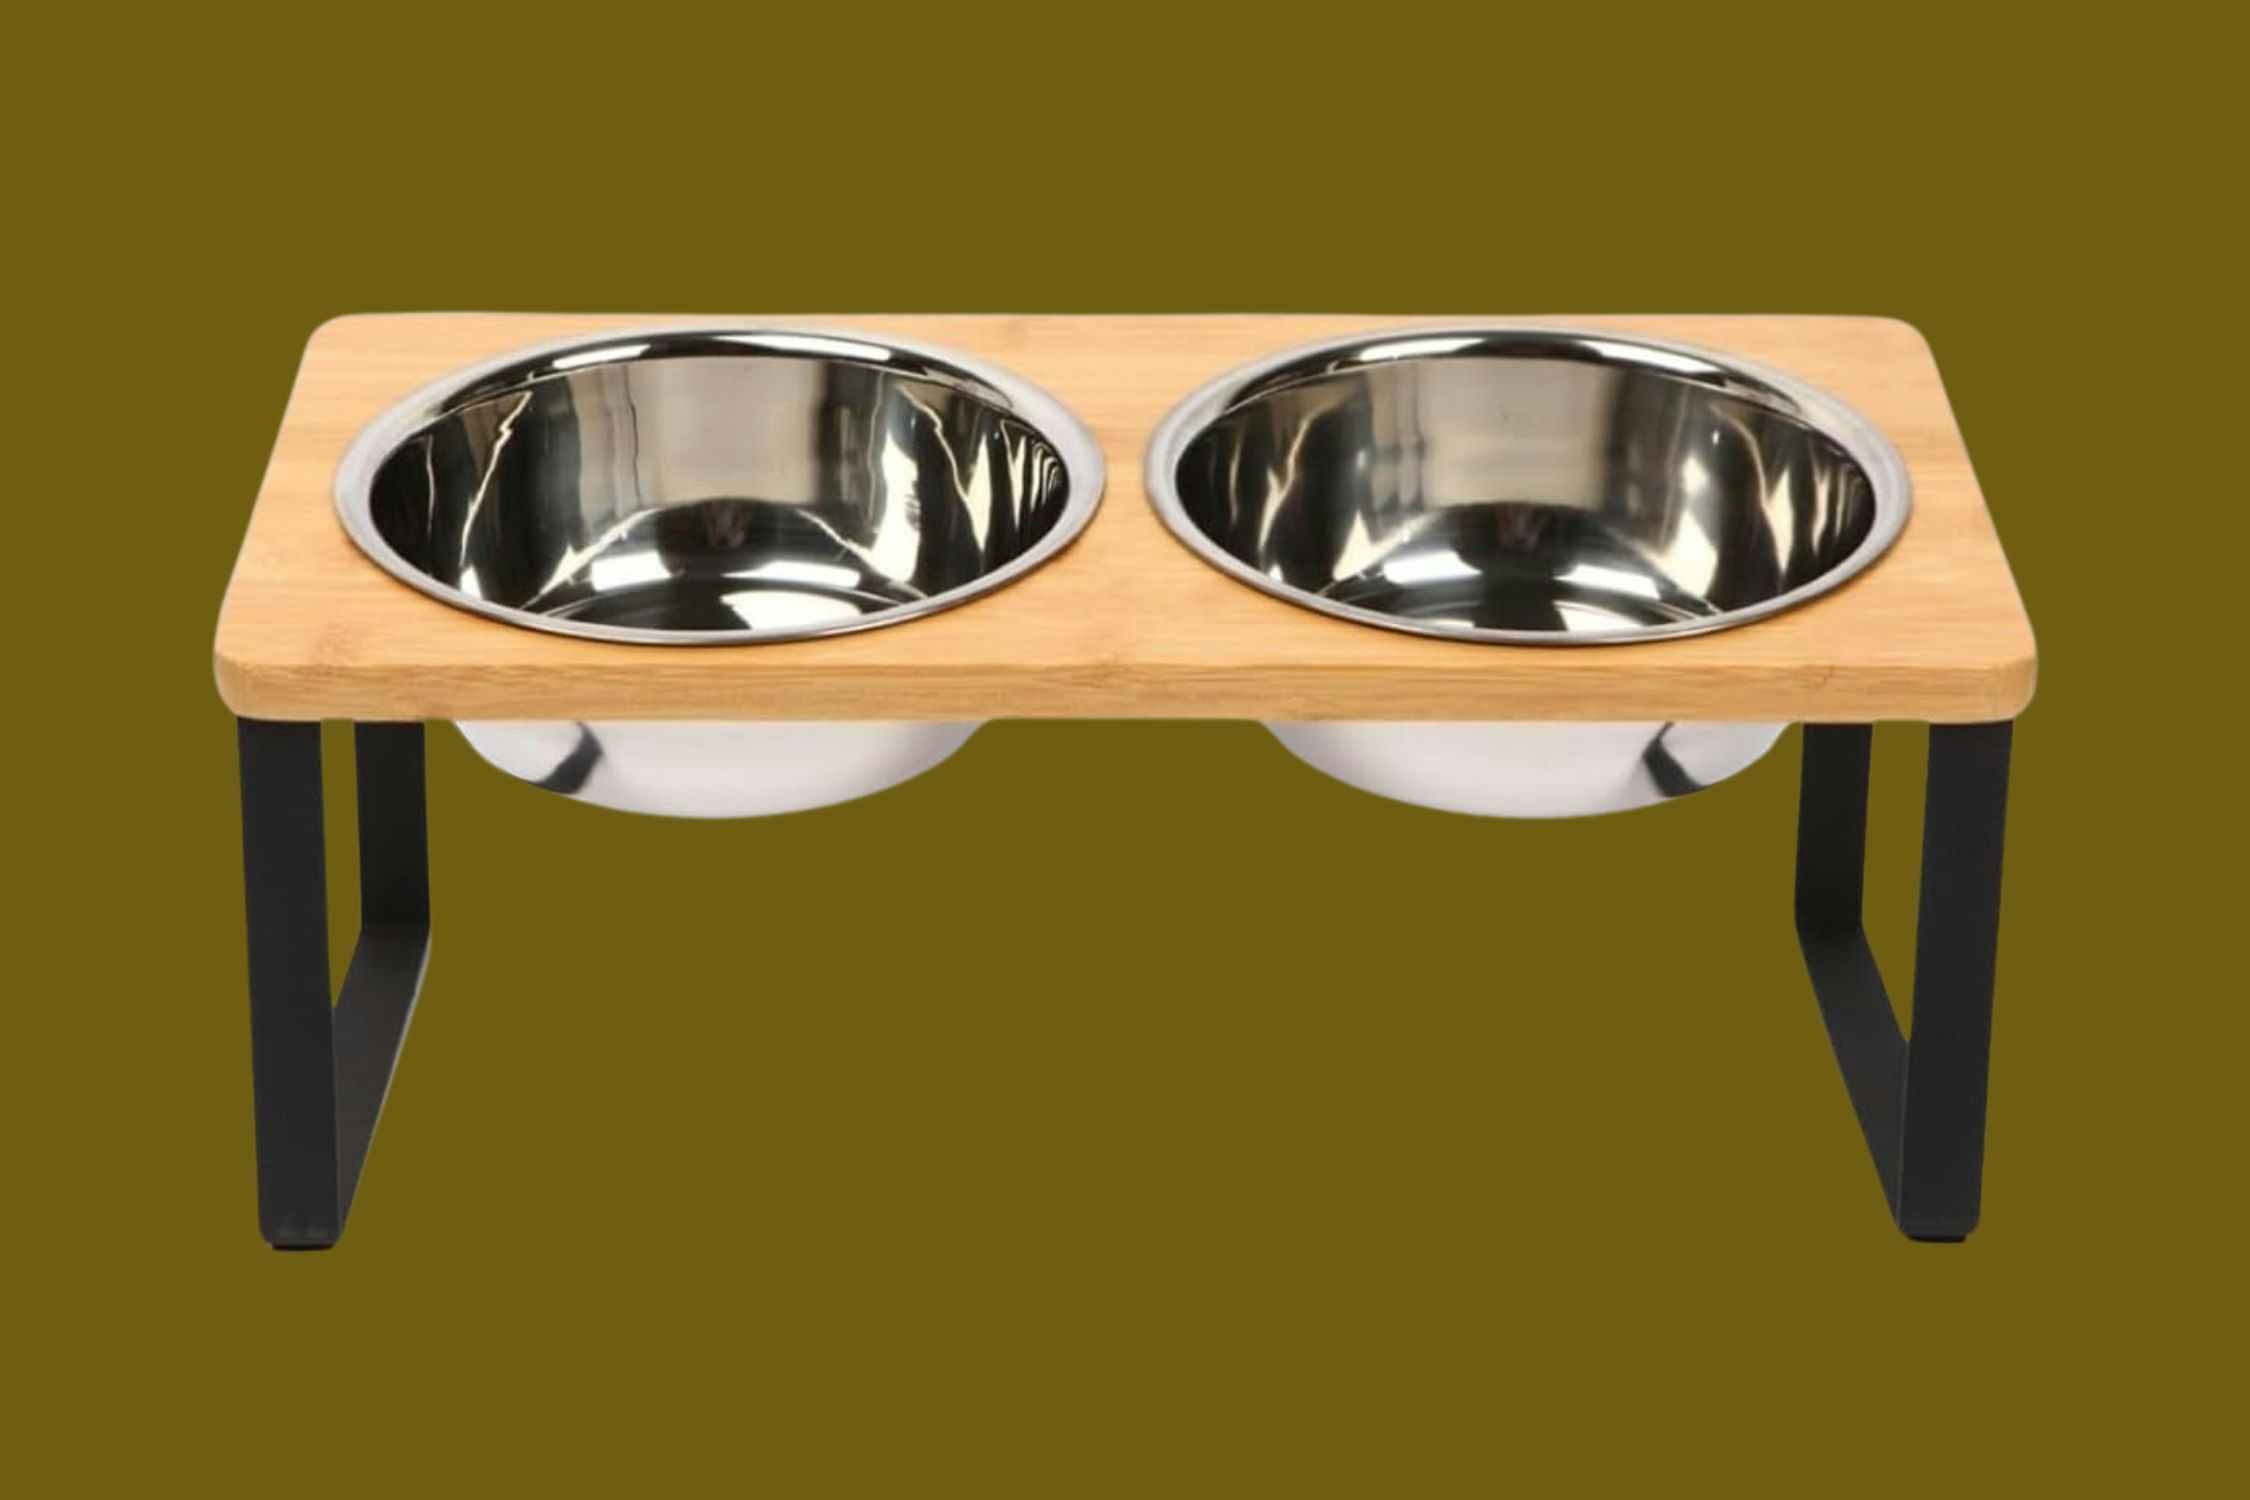 Elevated Cat Bowls, Just $9.49 on Amazon